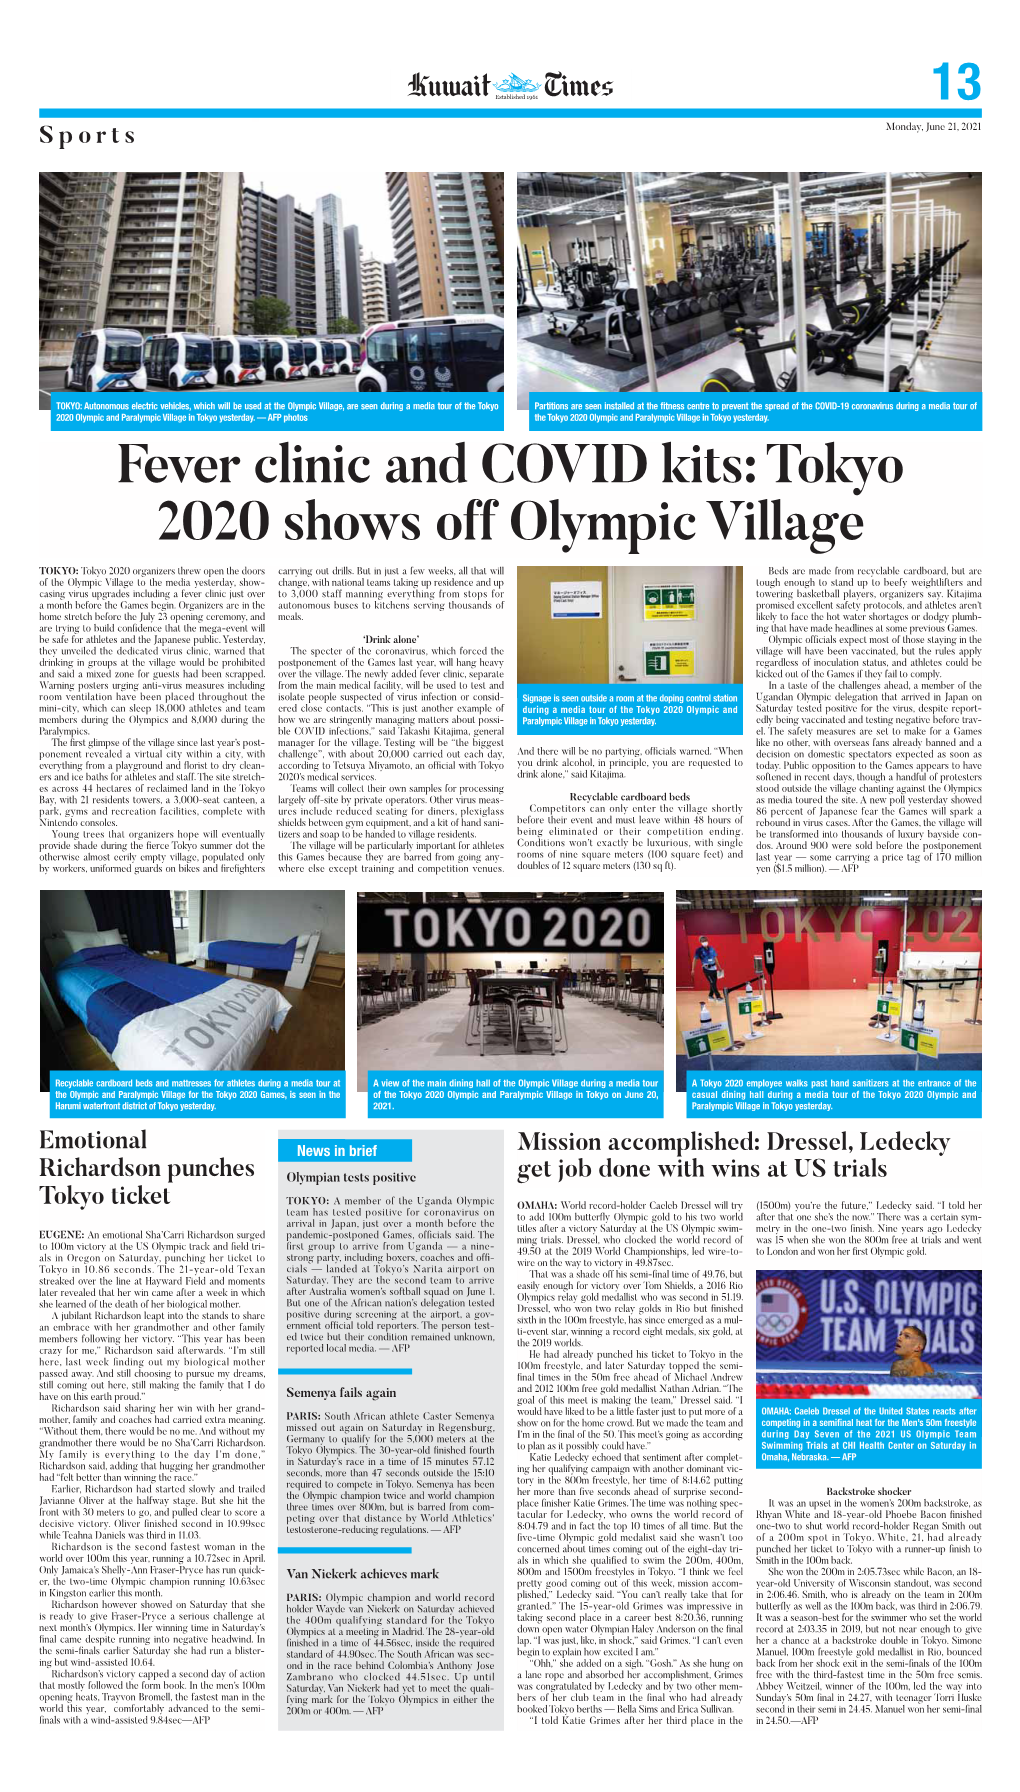 Tokyo 2020 Shows Off Olympic Village